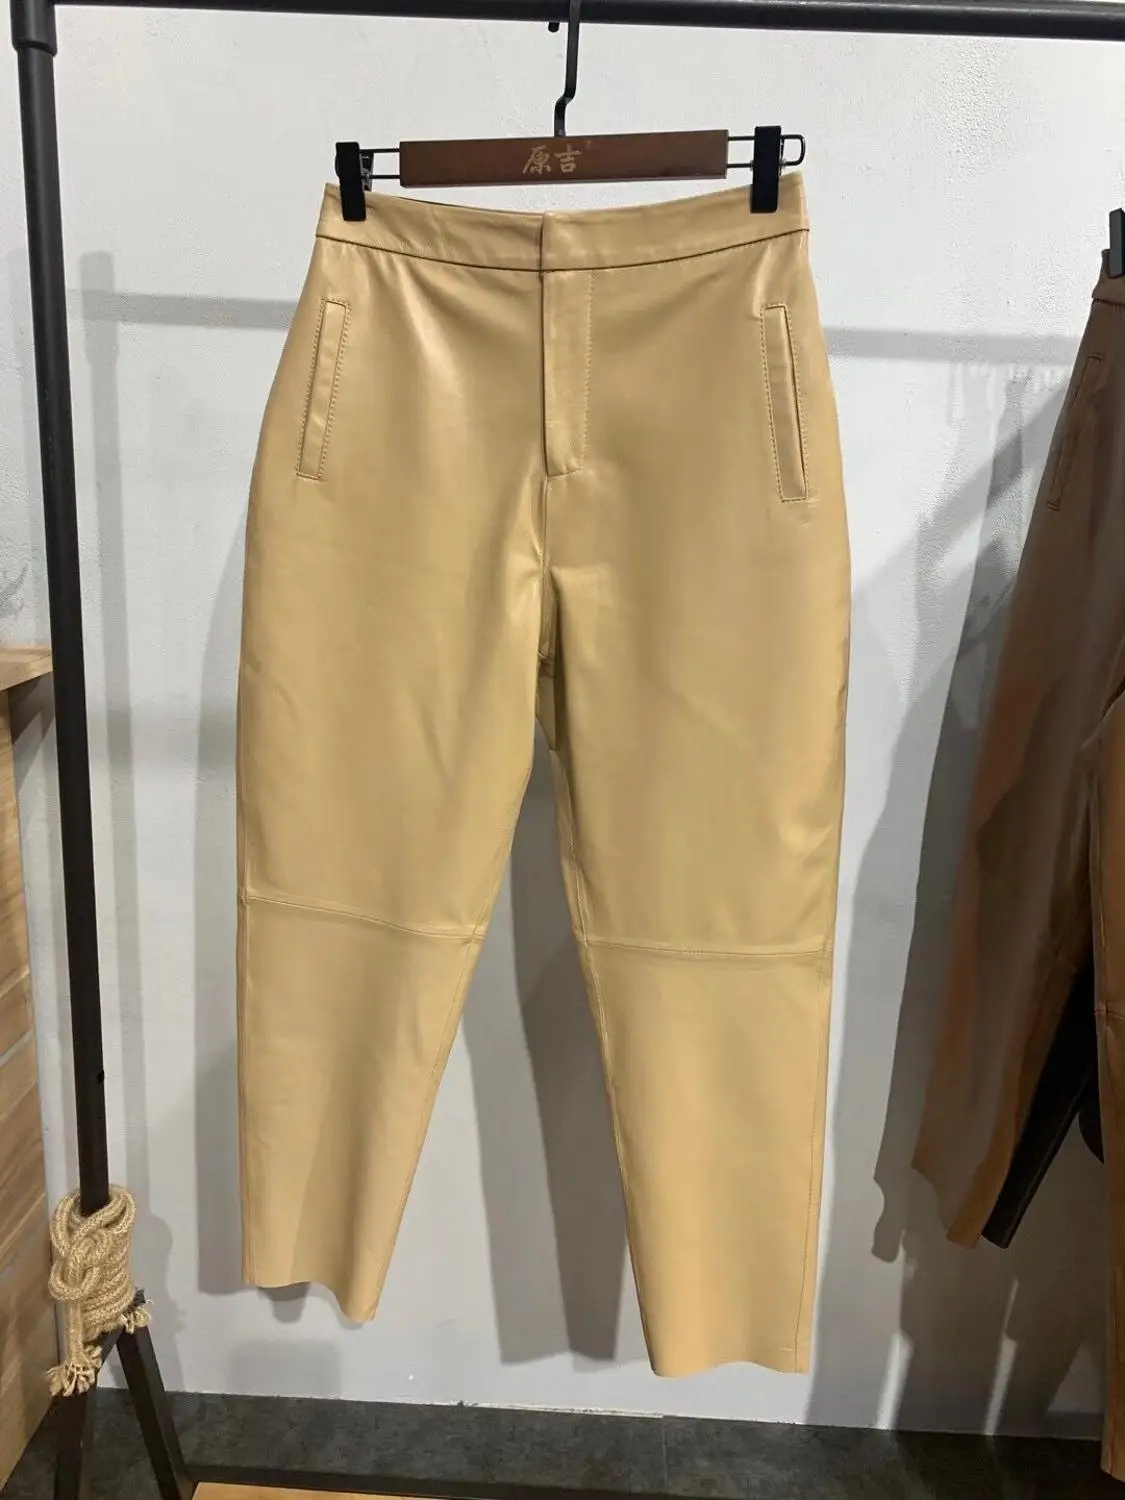 Real Leather Skinny Pants for Women – The Urban Tannery